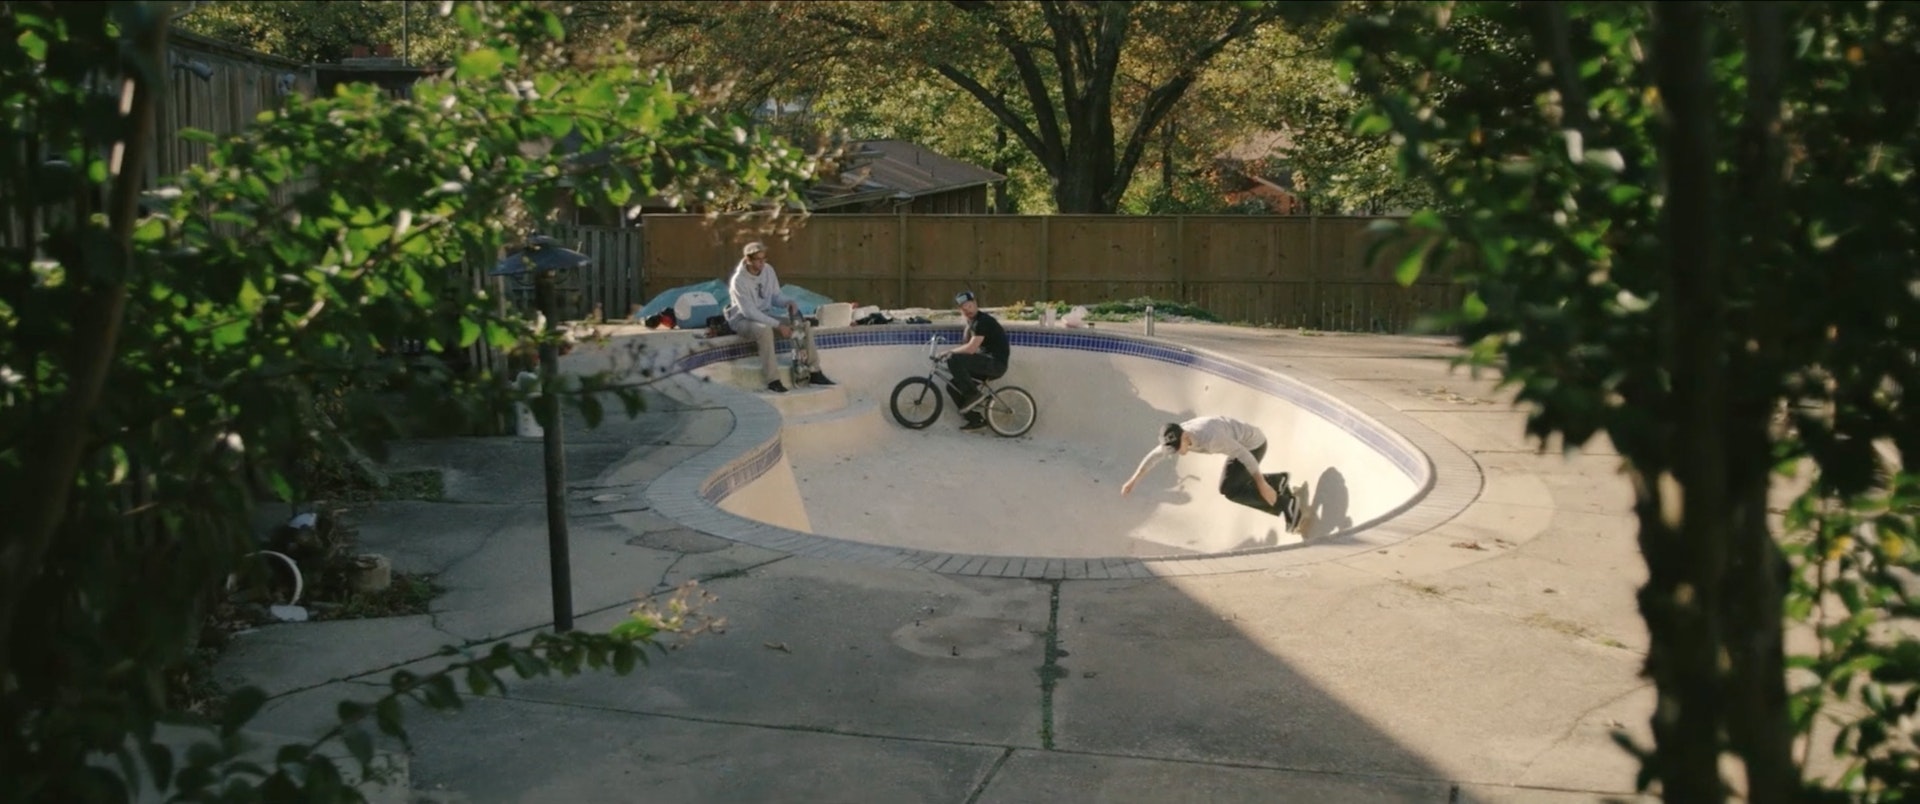 Video: Skateboarders scouring DC for undiscovered pools